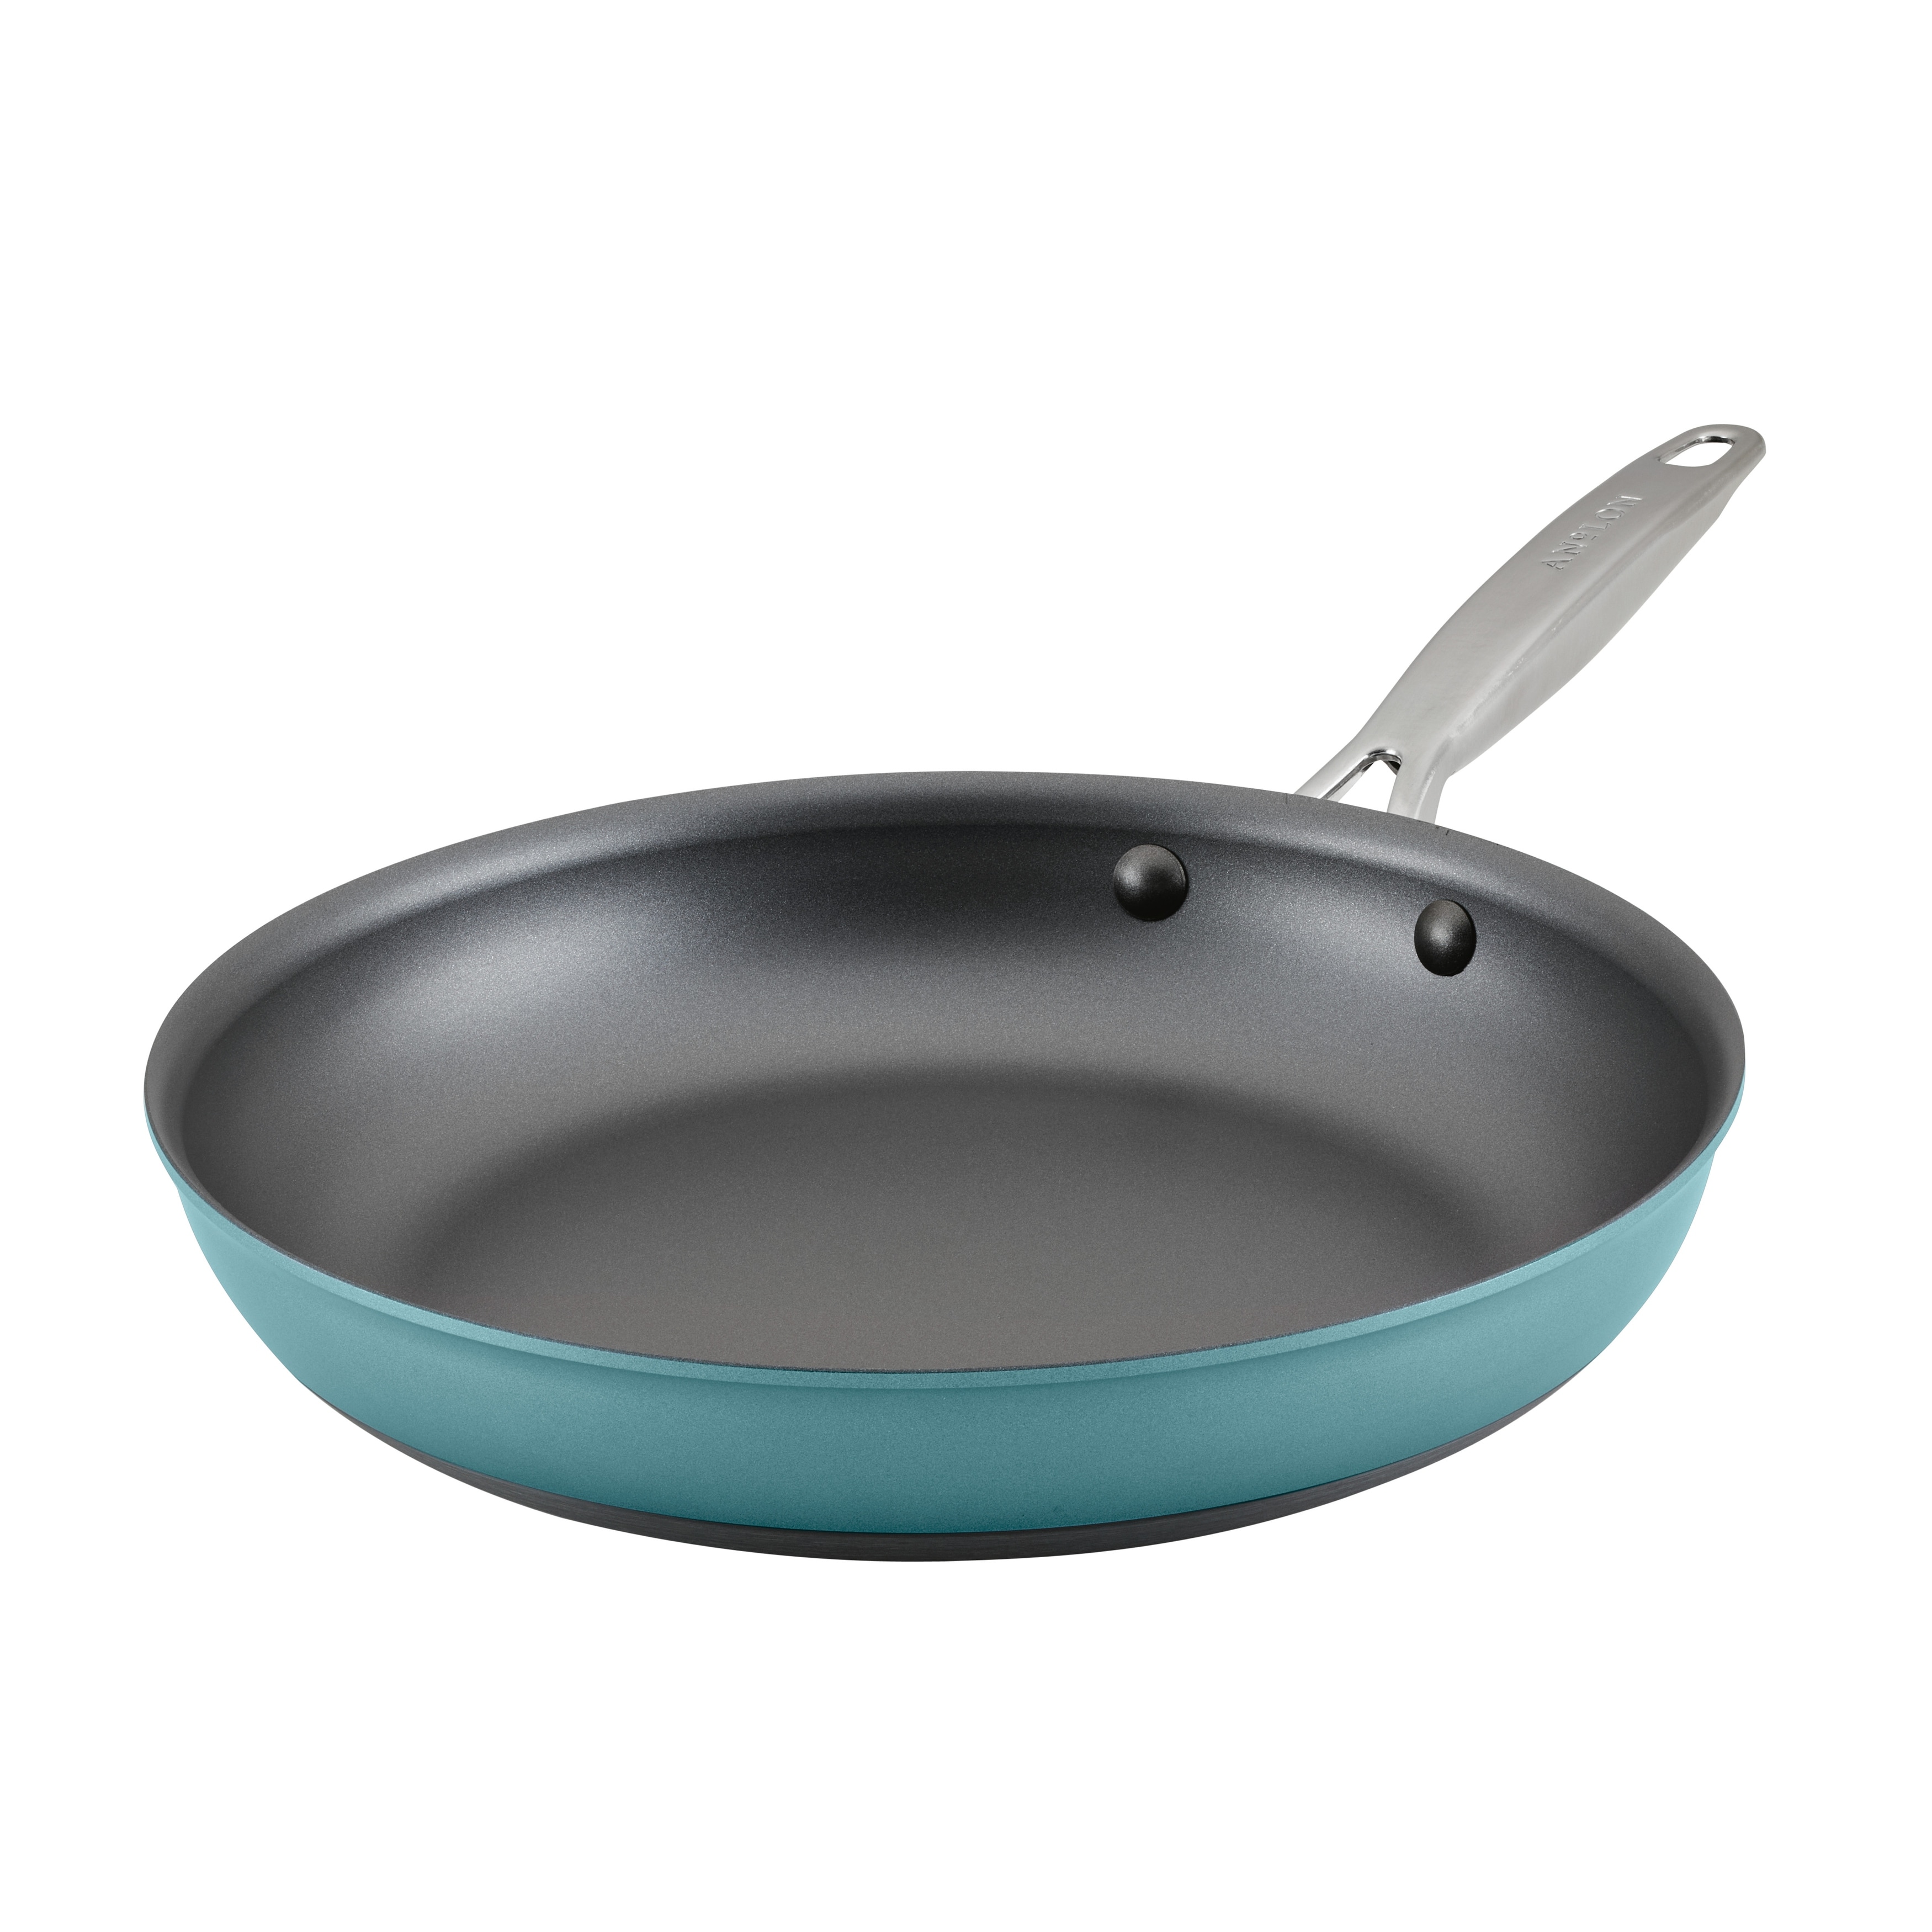 Anolon x Hybrid Cookware Nonstick Frying Pan with Helper Handle, 12-Inch